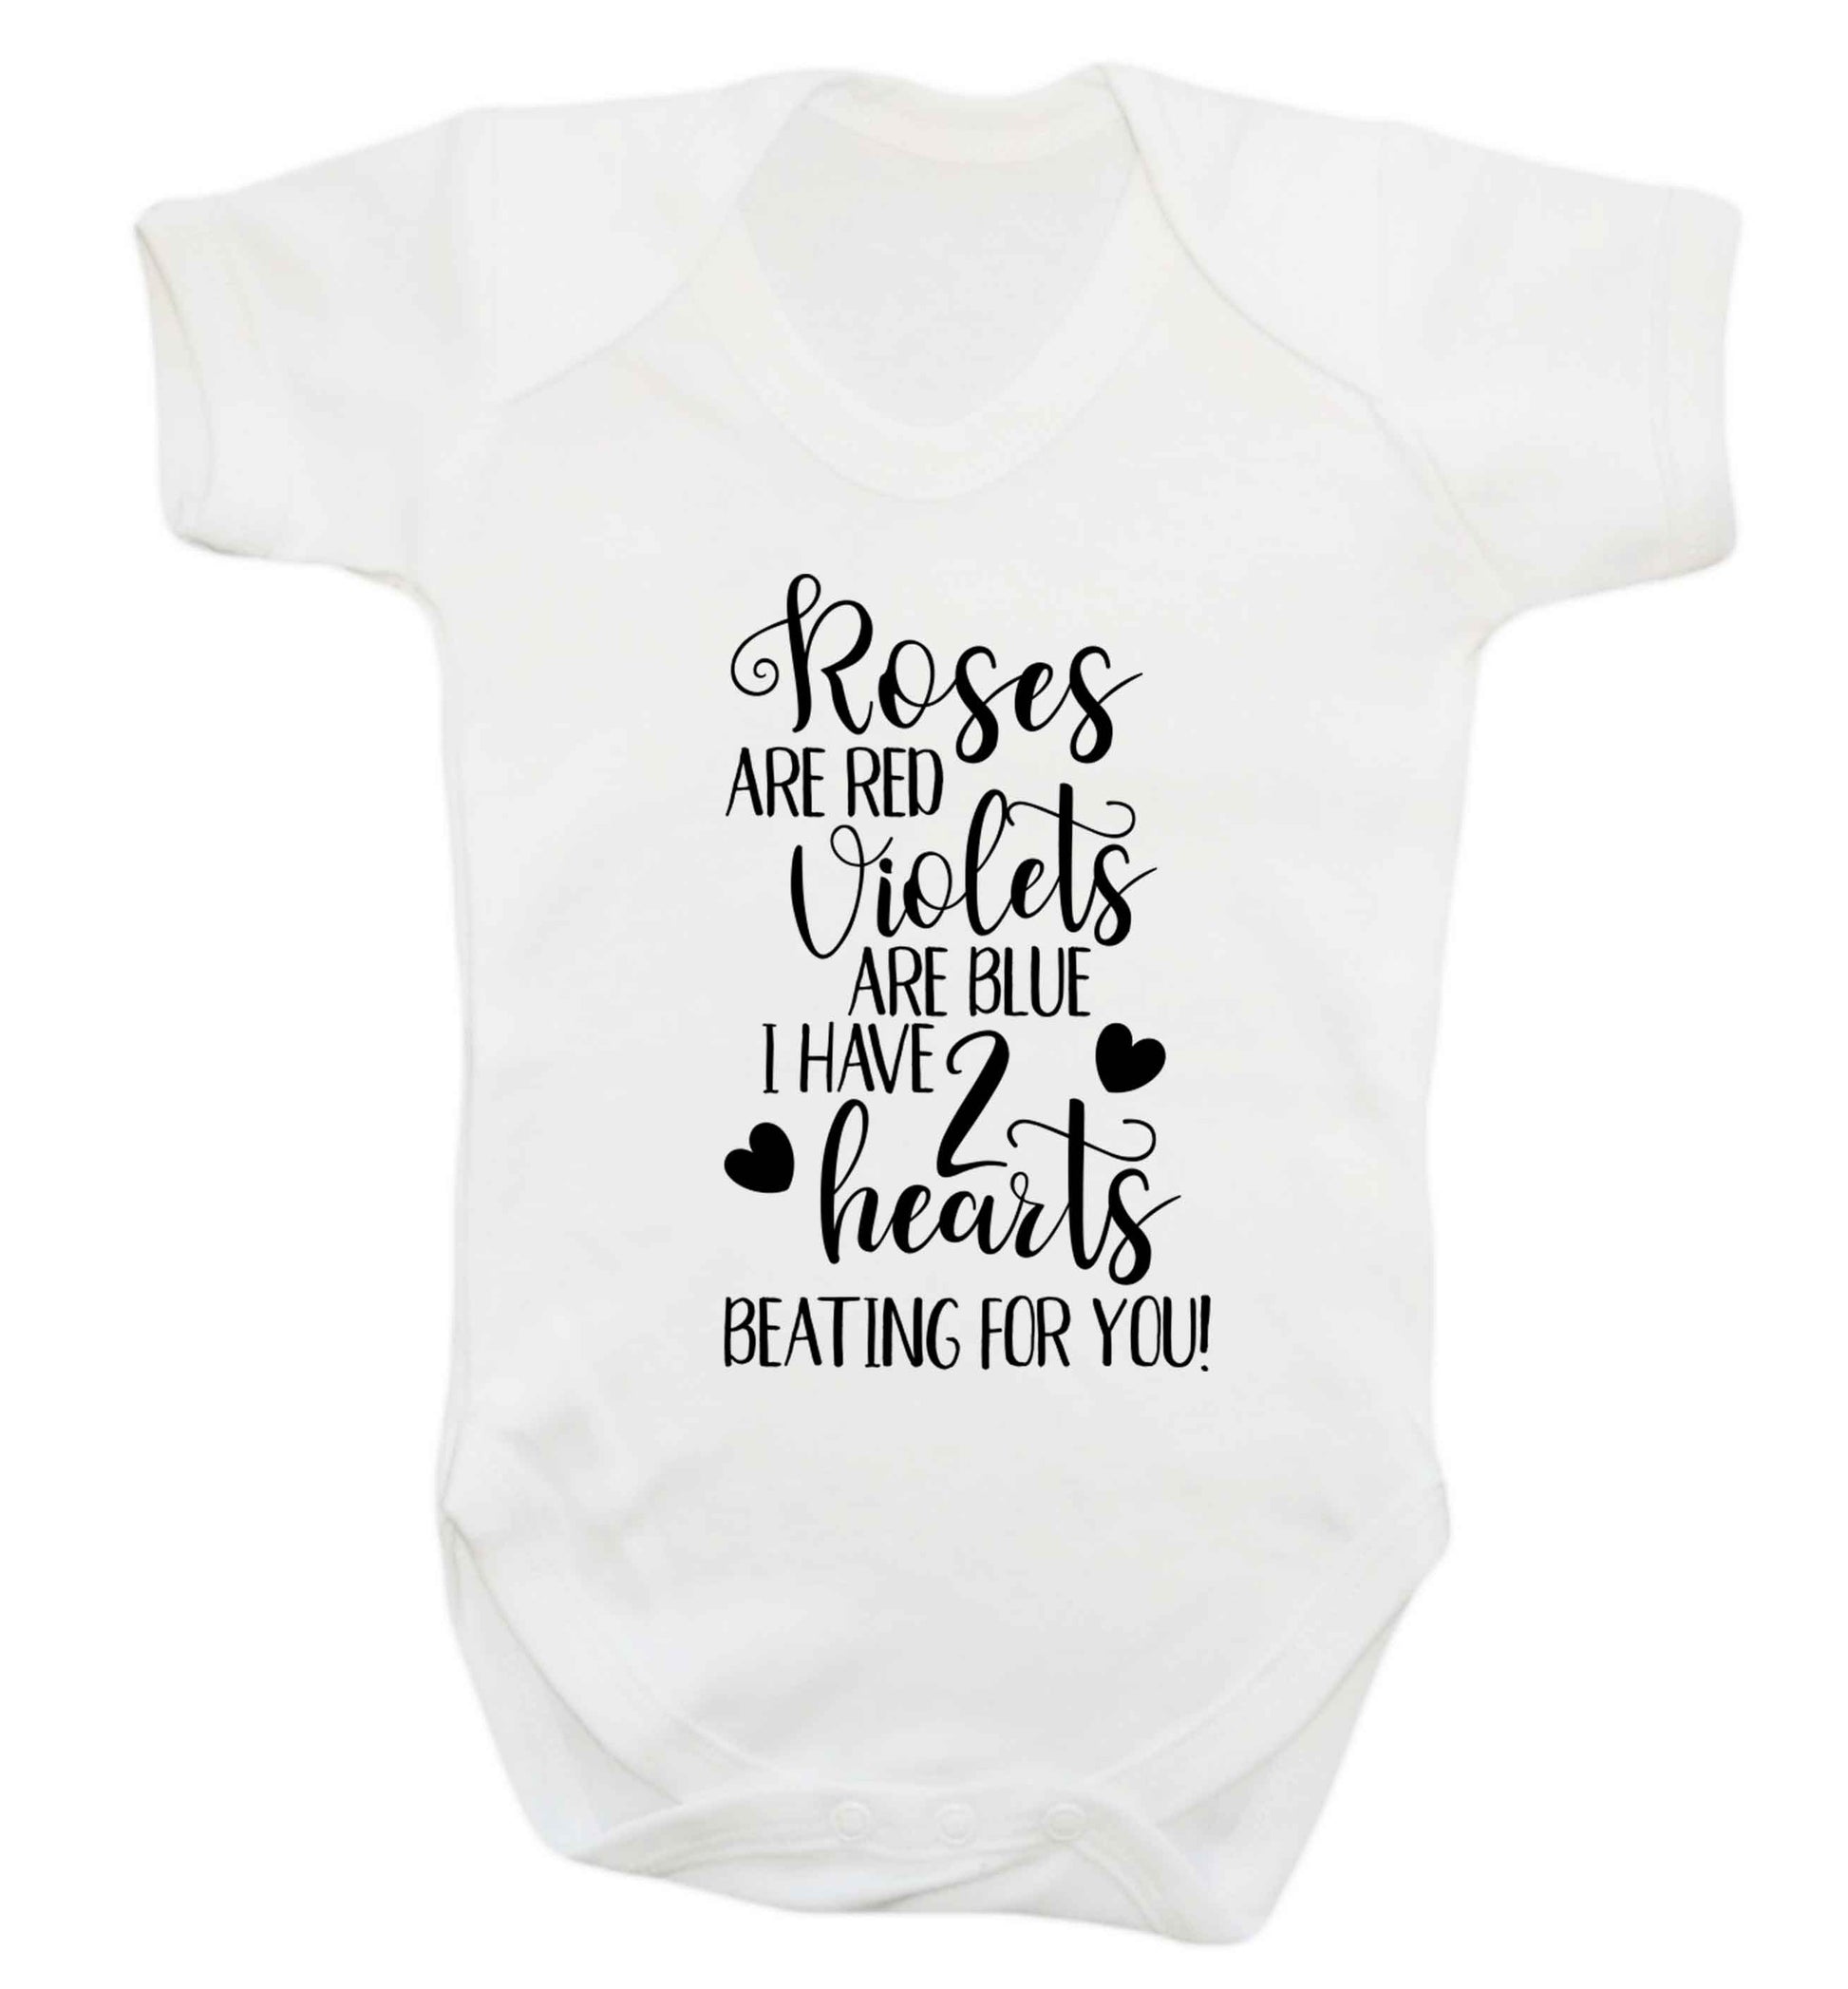 Roses are red violets are blue I have two hearts beating for you Baby Vest white 18-24 months